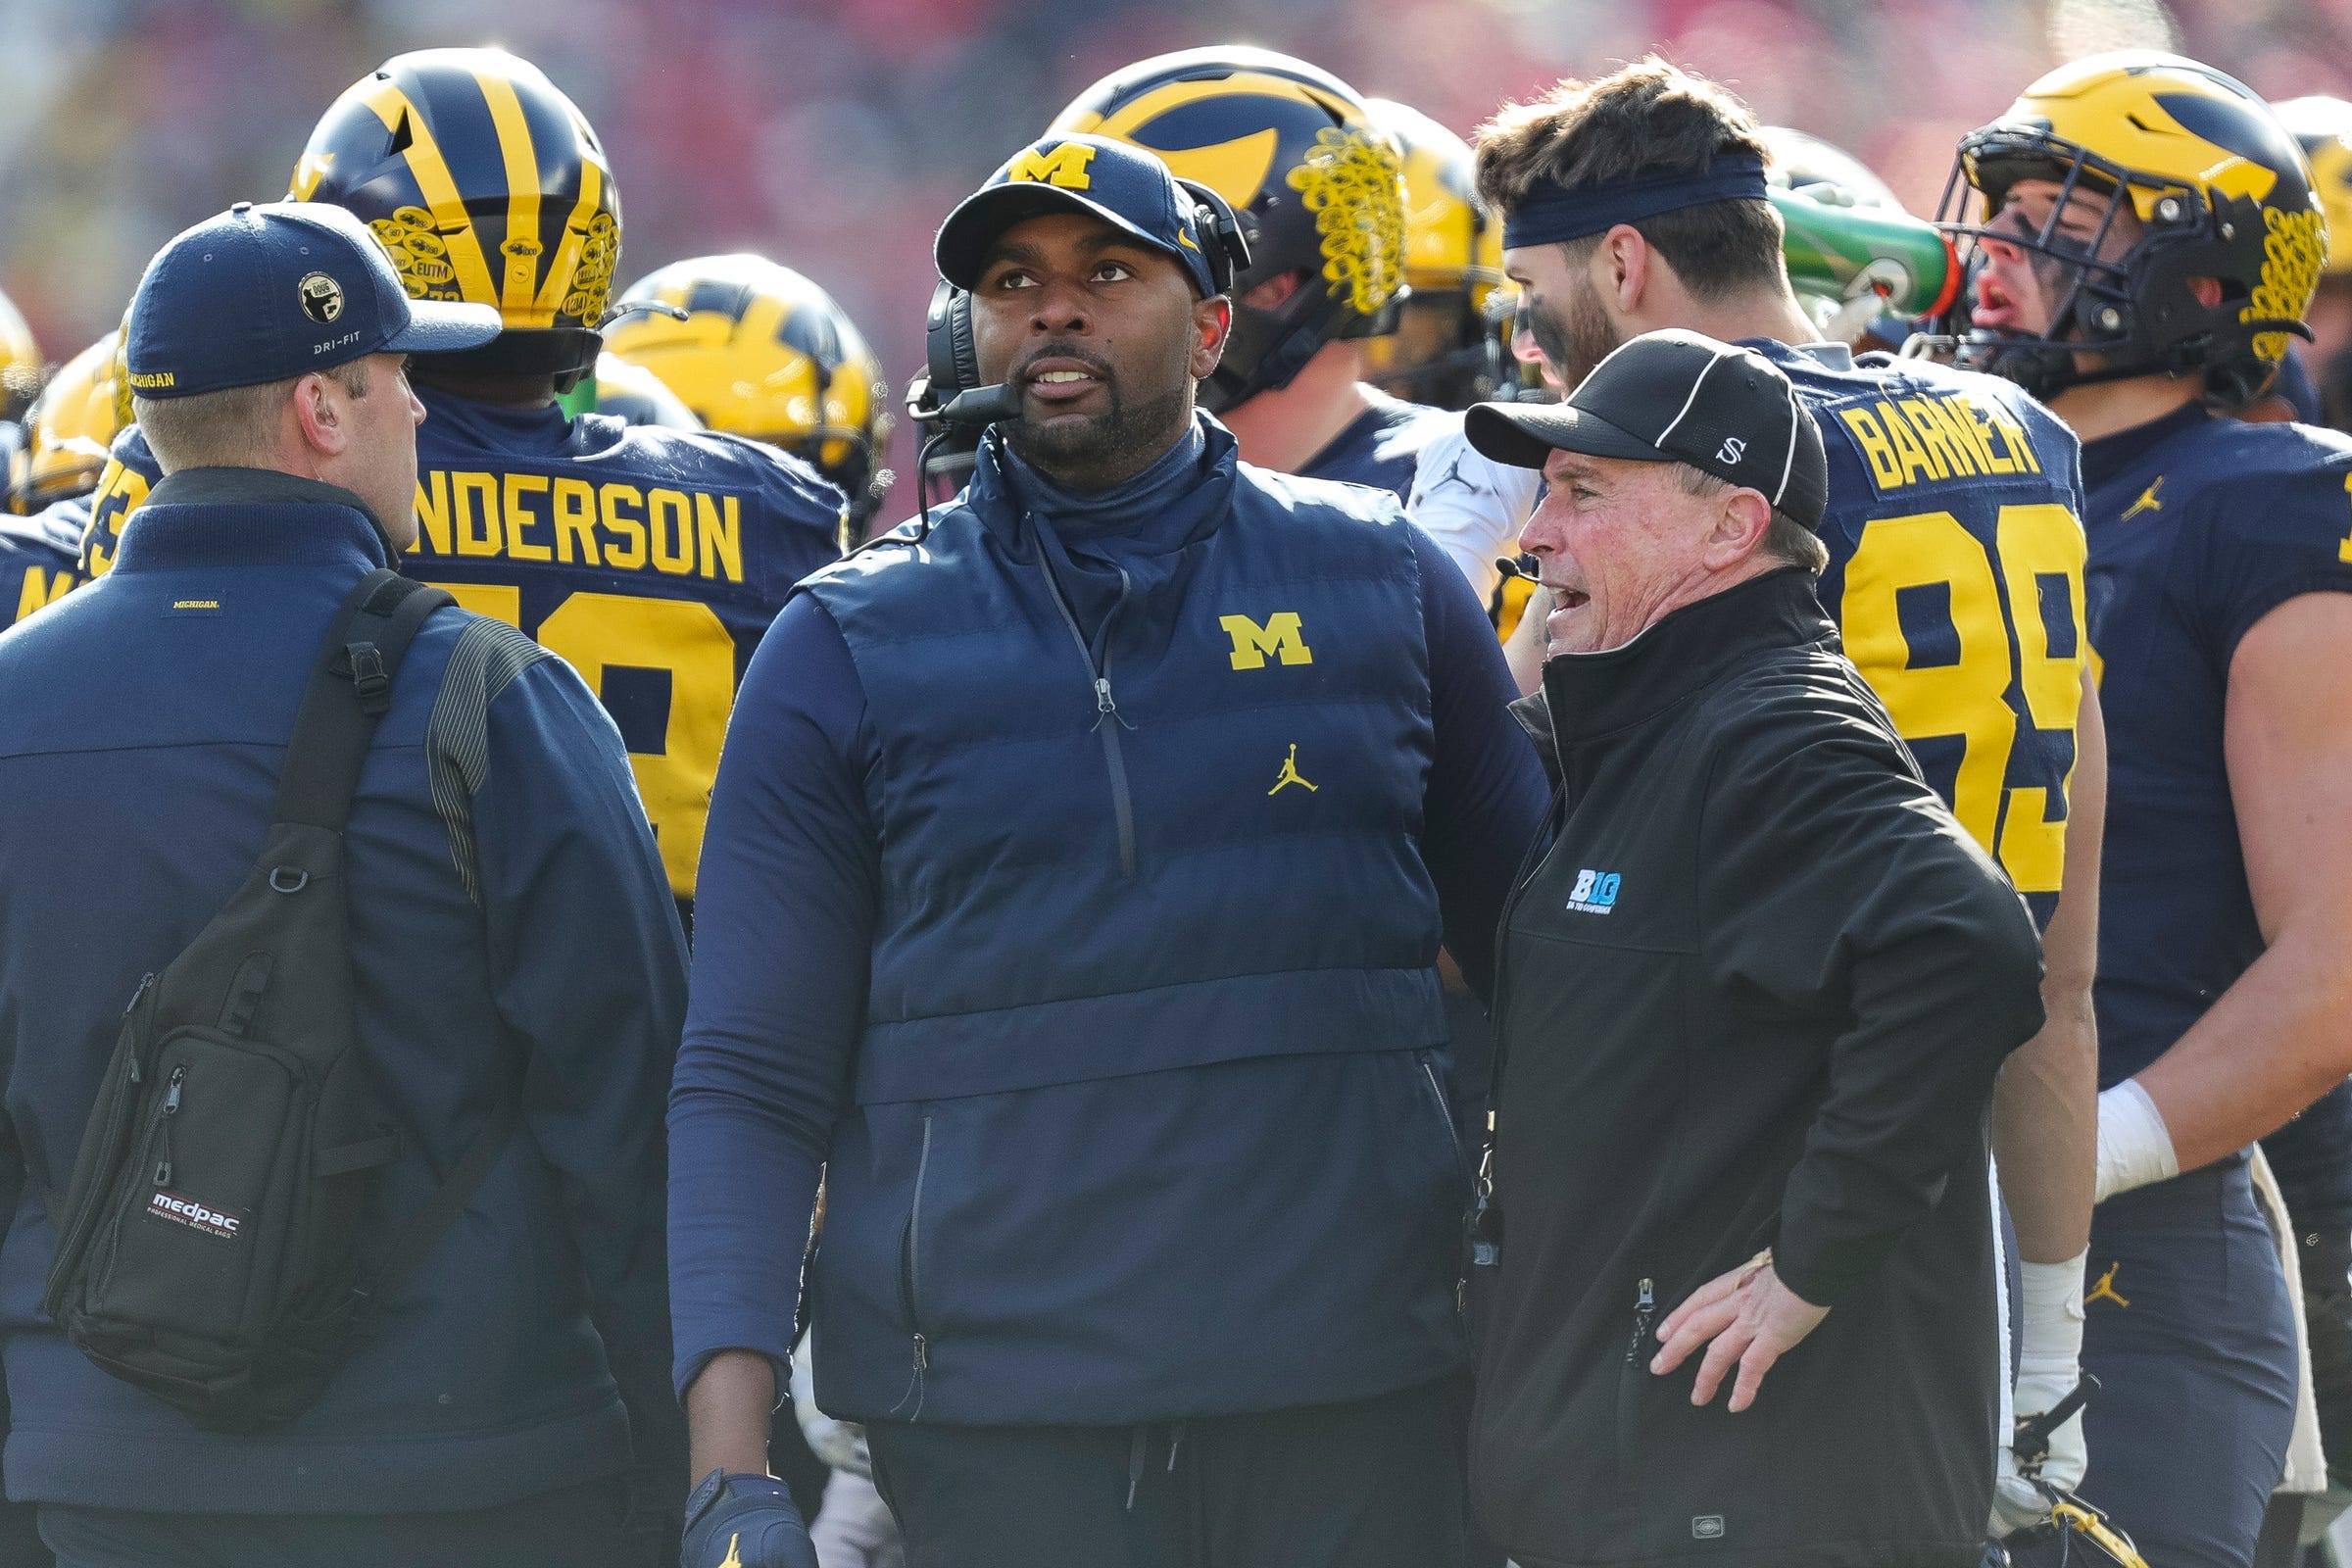 ncaa sanctions michigan with probation and recruiting penalties for football violations